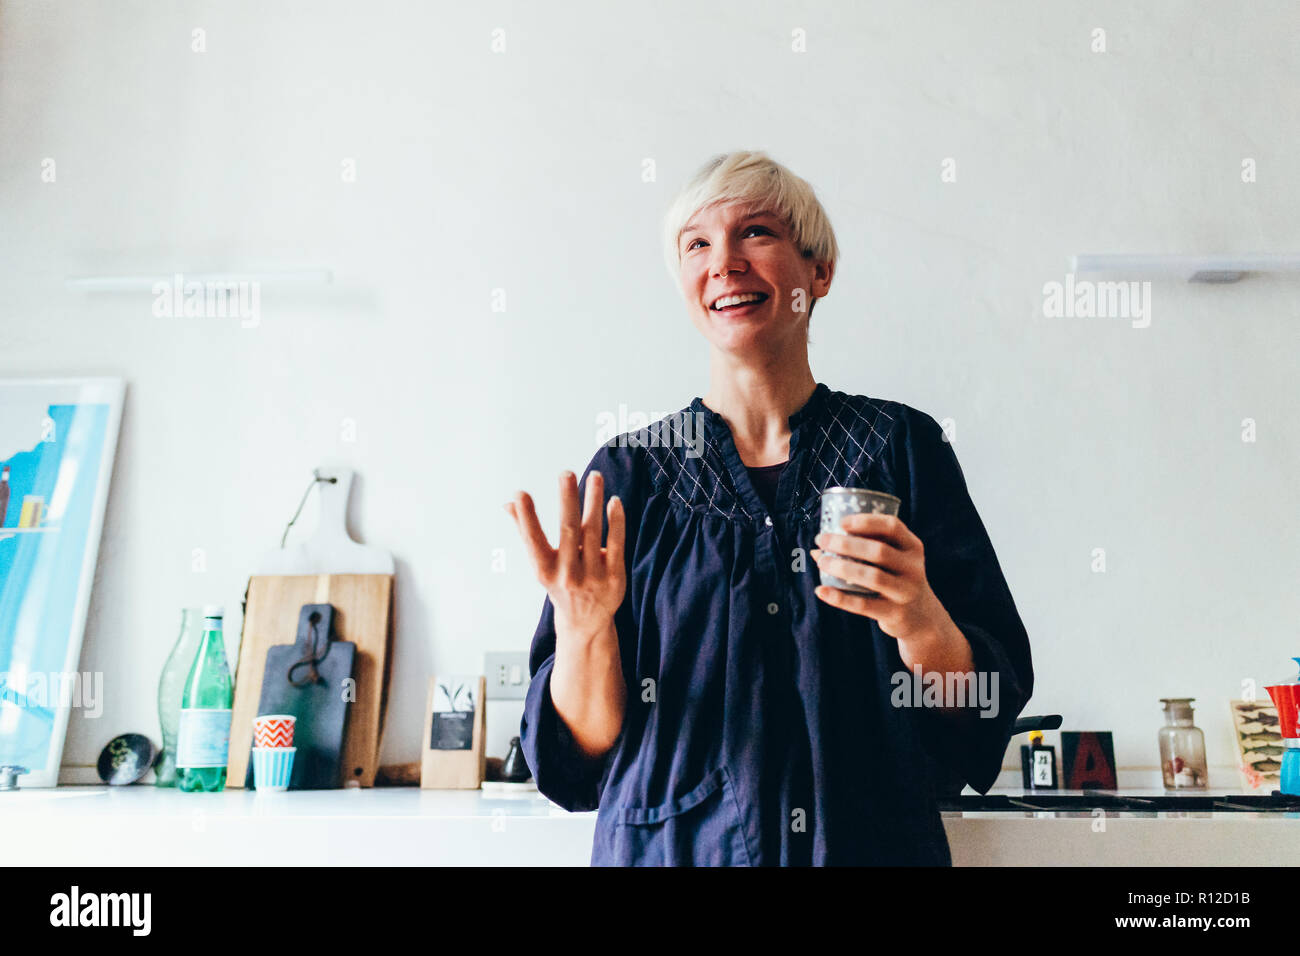 Woman smiling in kitchen Stock Photo